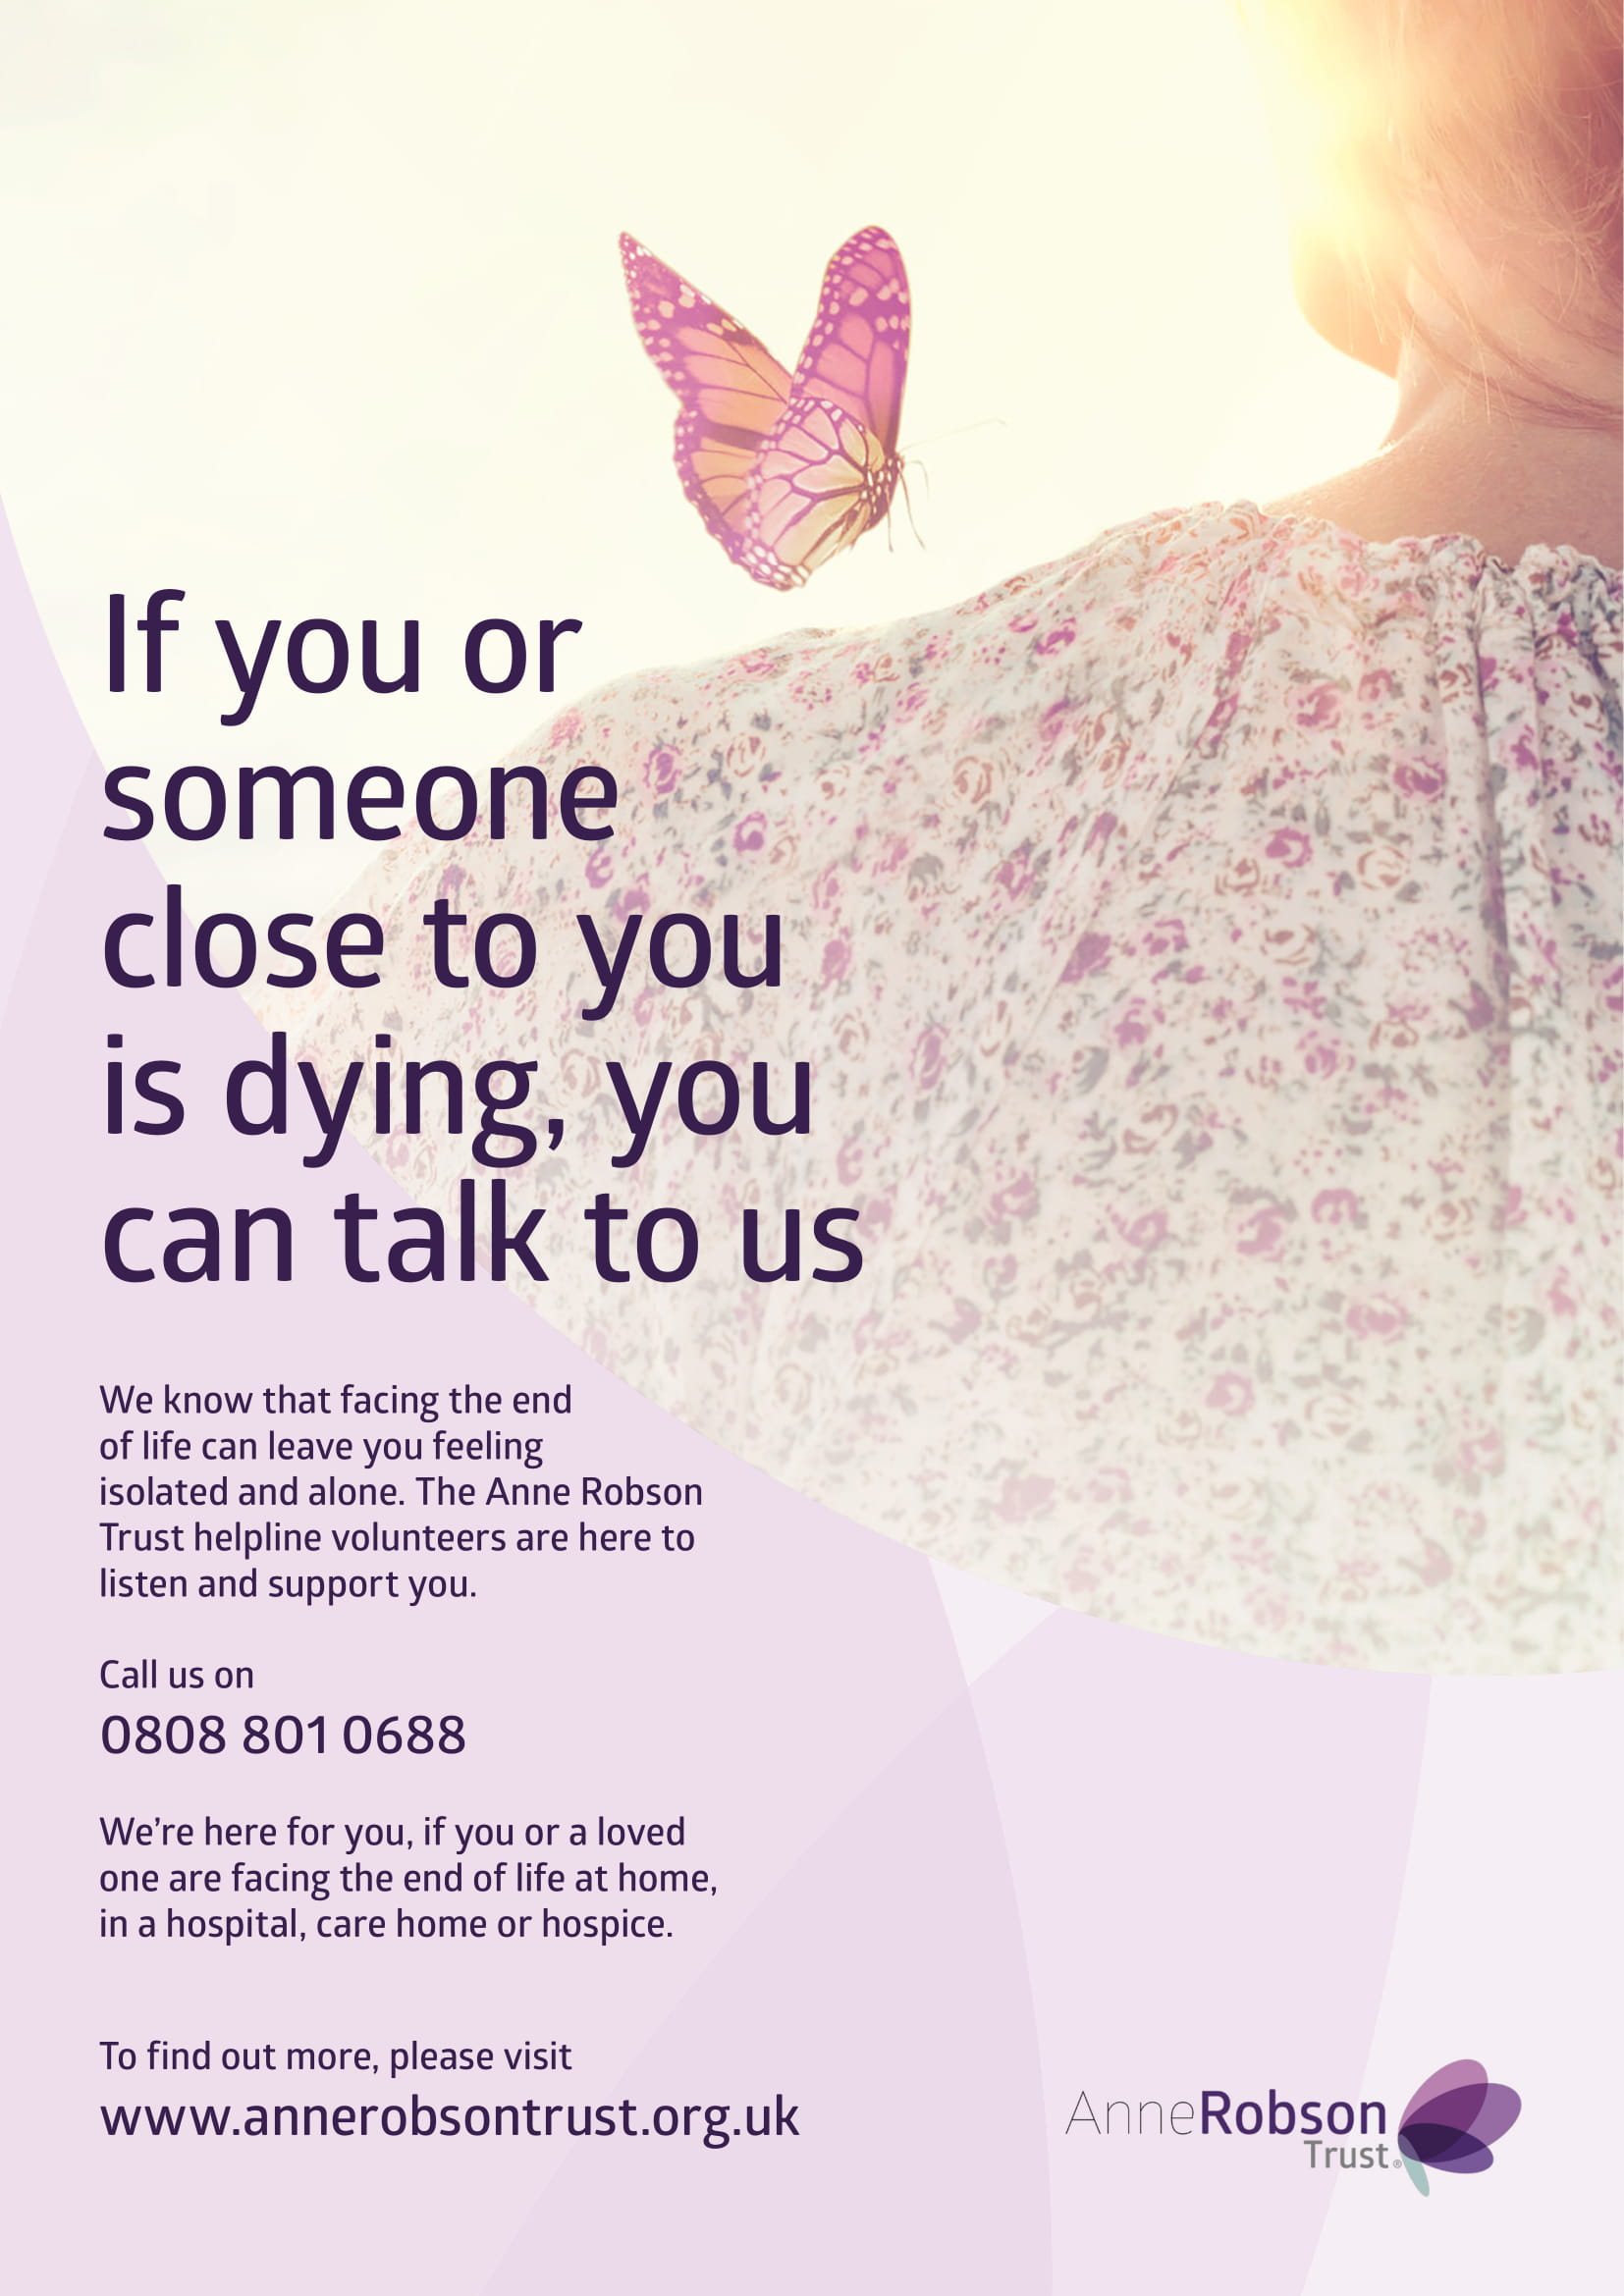 Anne Robson Trust Poster giving contact details